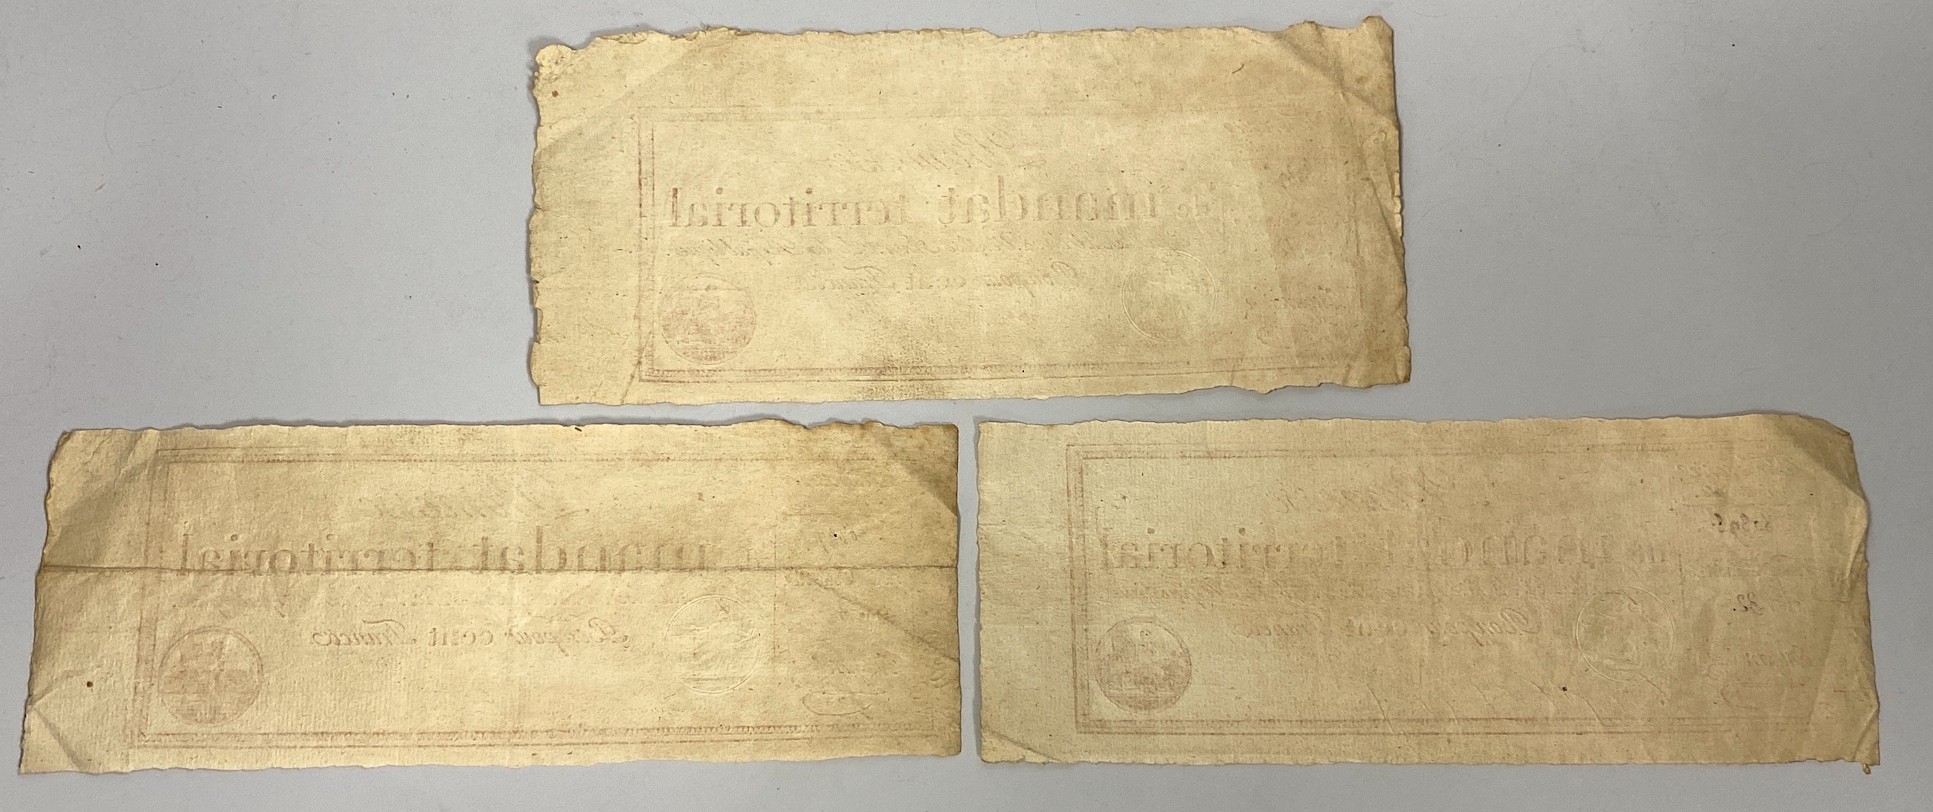 French Revolutionary banknotes, three Mandat Territorial Cent Francs No. 80896-80898, Series 32, 'Promesse De Mandat Territorial', one embossed stamp (3)